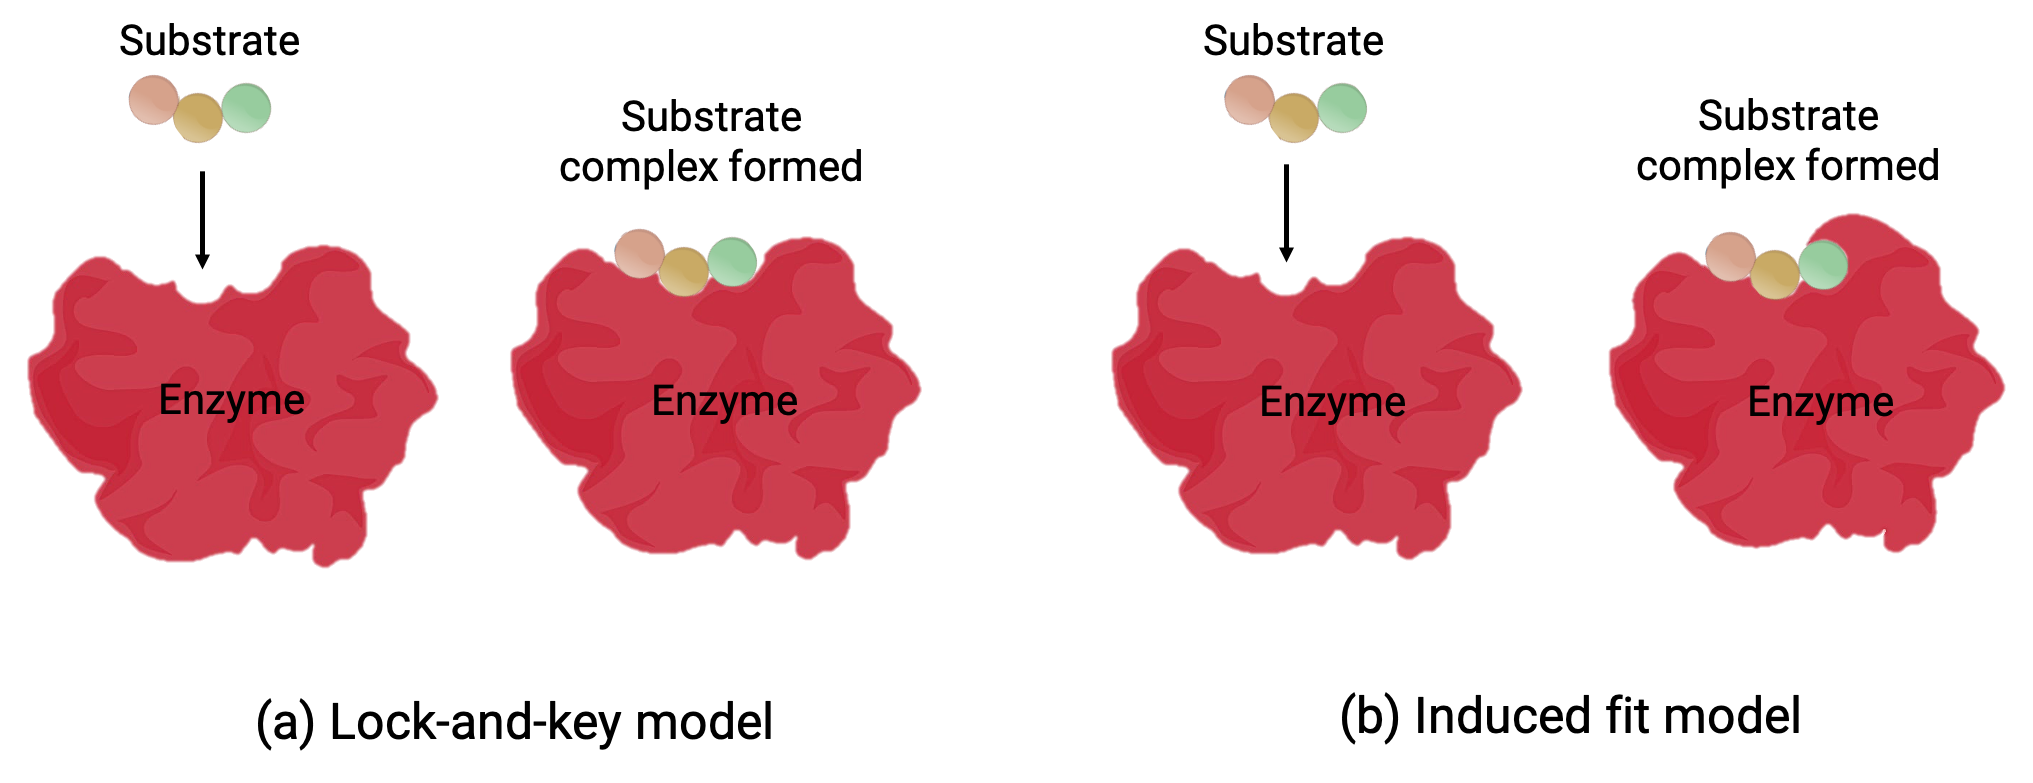 Enzymes: Lock-and-key & Induced-fit Models; Enzyme Inhibitors | Chemistry |  JoVE